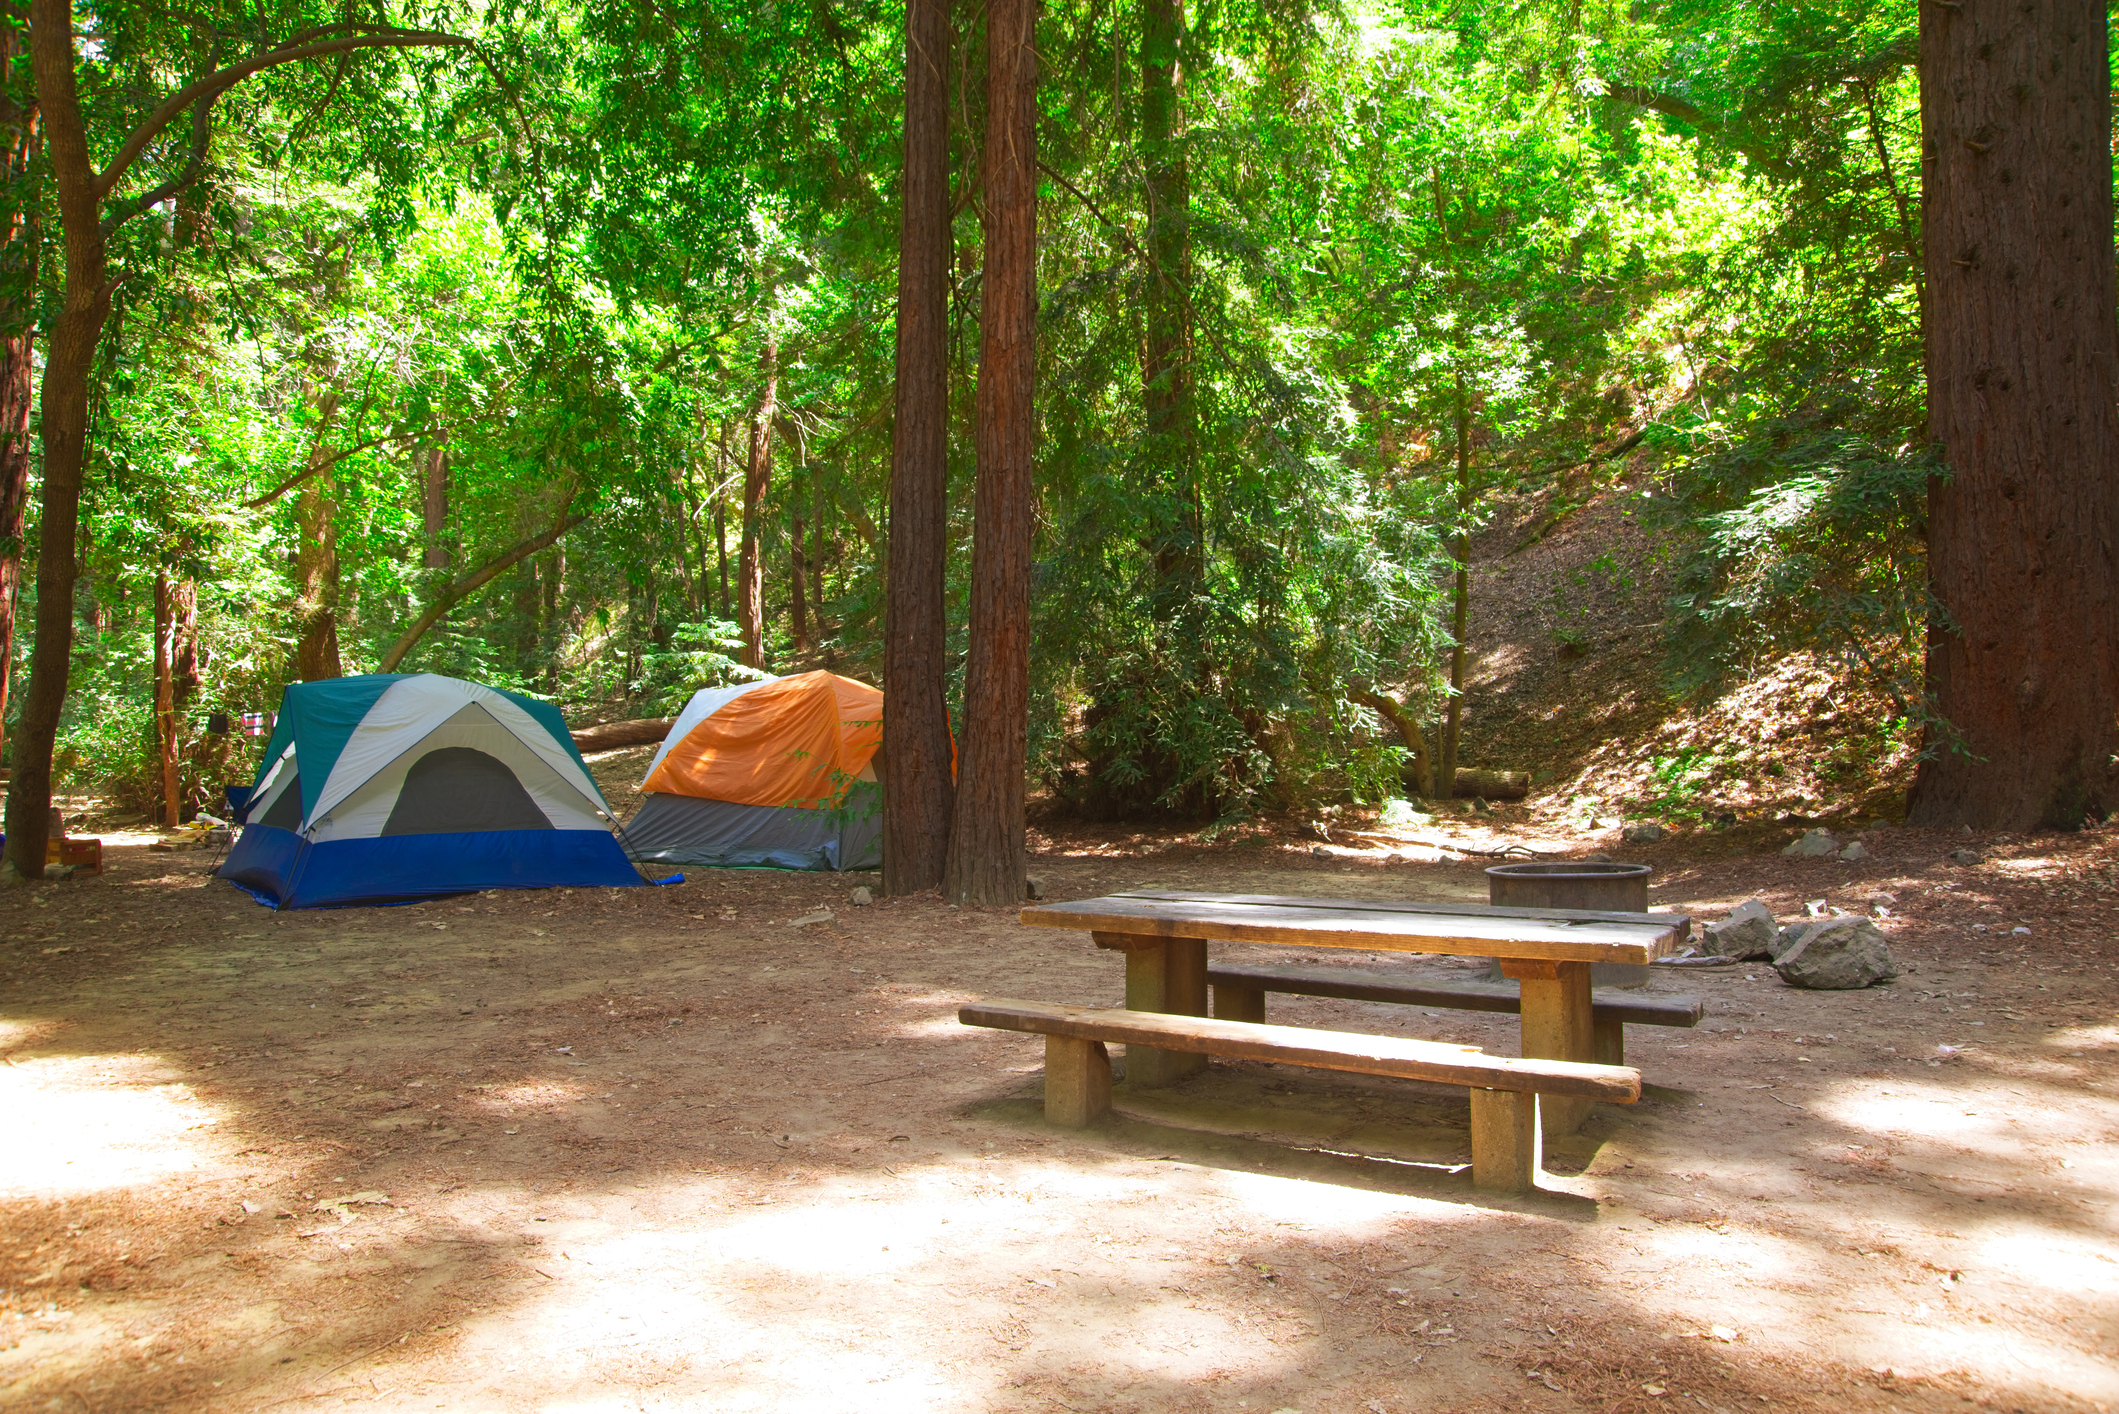 Tents surrounded by redwood trees and a picnic bench nearby.